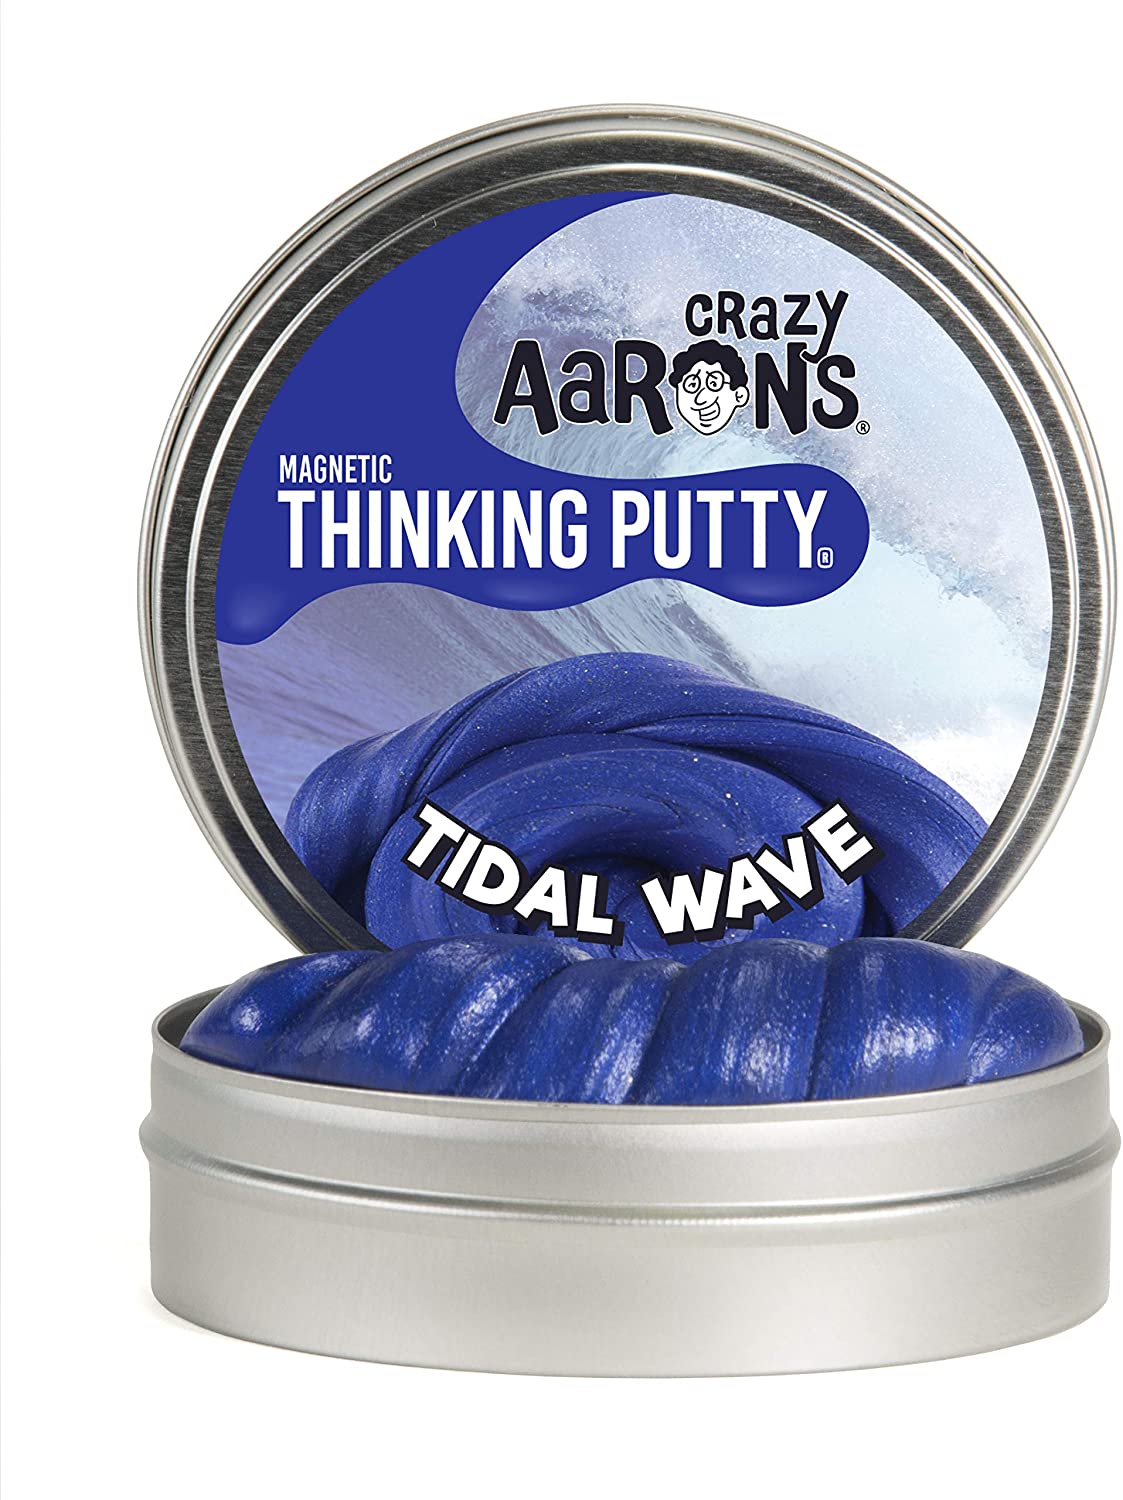 Crazy Aaron's Thinking Putty - Magnetic Storms